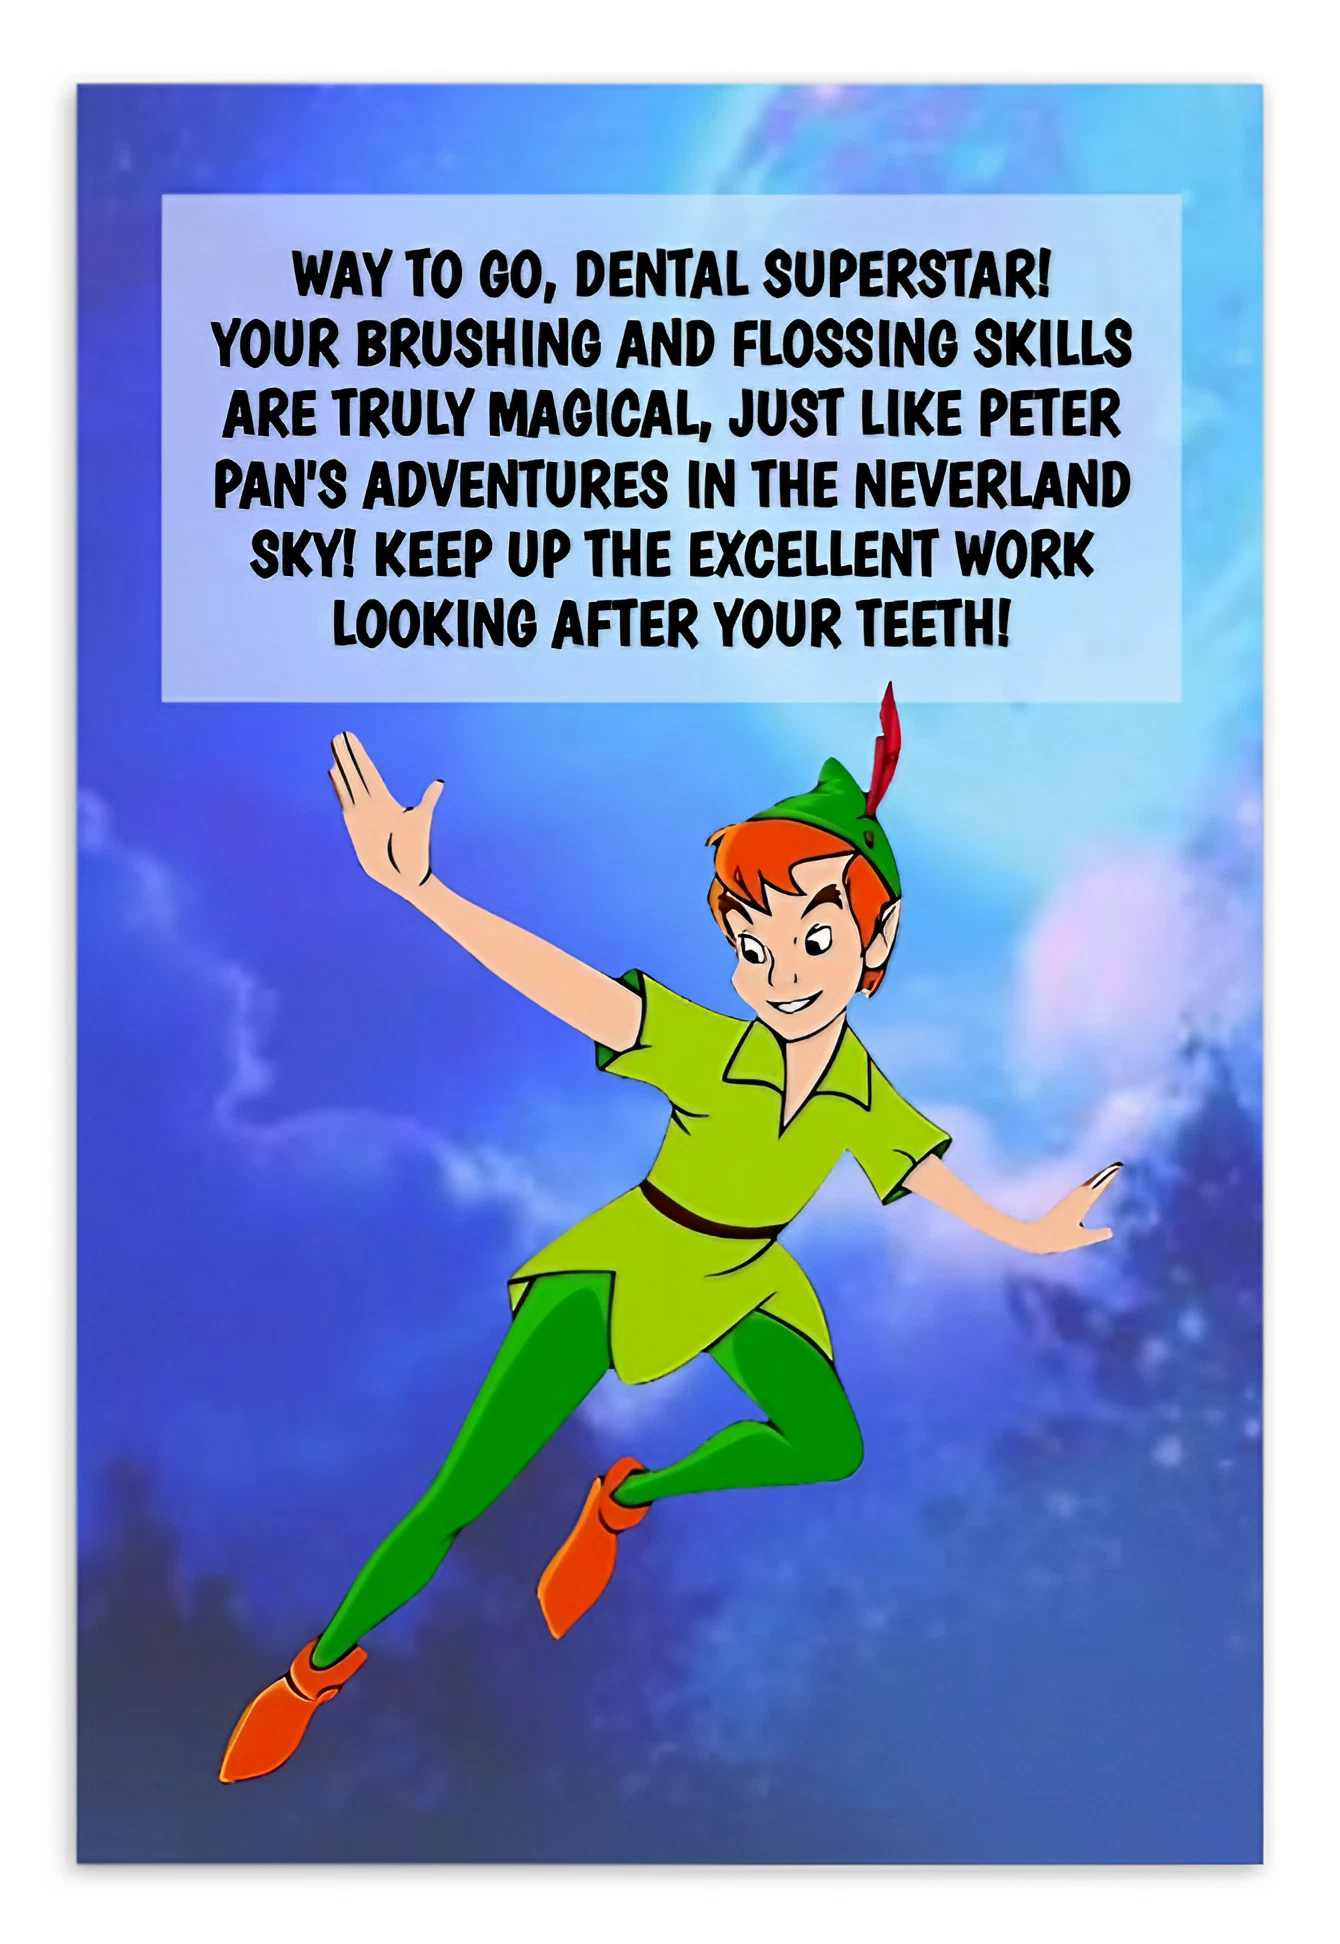 Peter Pan | Dental Motivational & Reward Cards- Way To Go! Dental Supetstar! Your Brushing And Flossing Skills Are Excellent, Just Like Peter Pan's Adventures In Magical Neverland Sky!